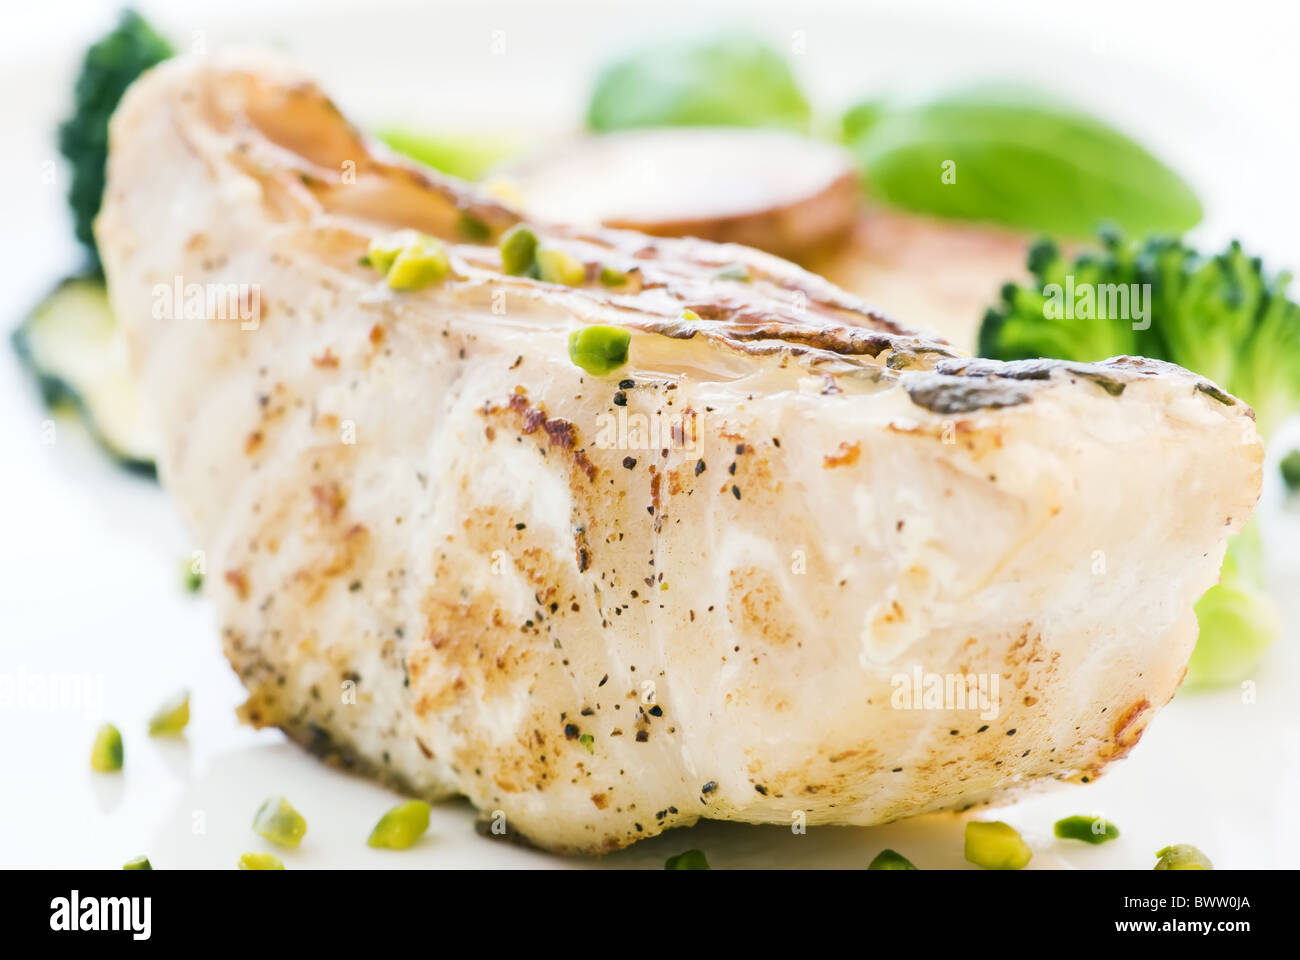 Parrot fish steak with vegetables and chips as closeup on a white plate Stock Photo